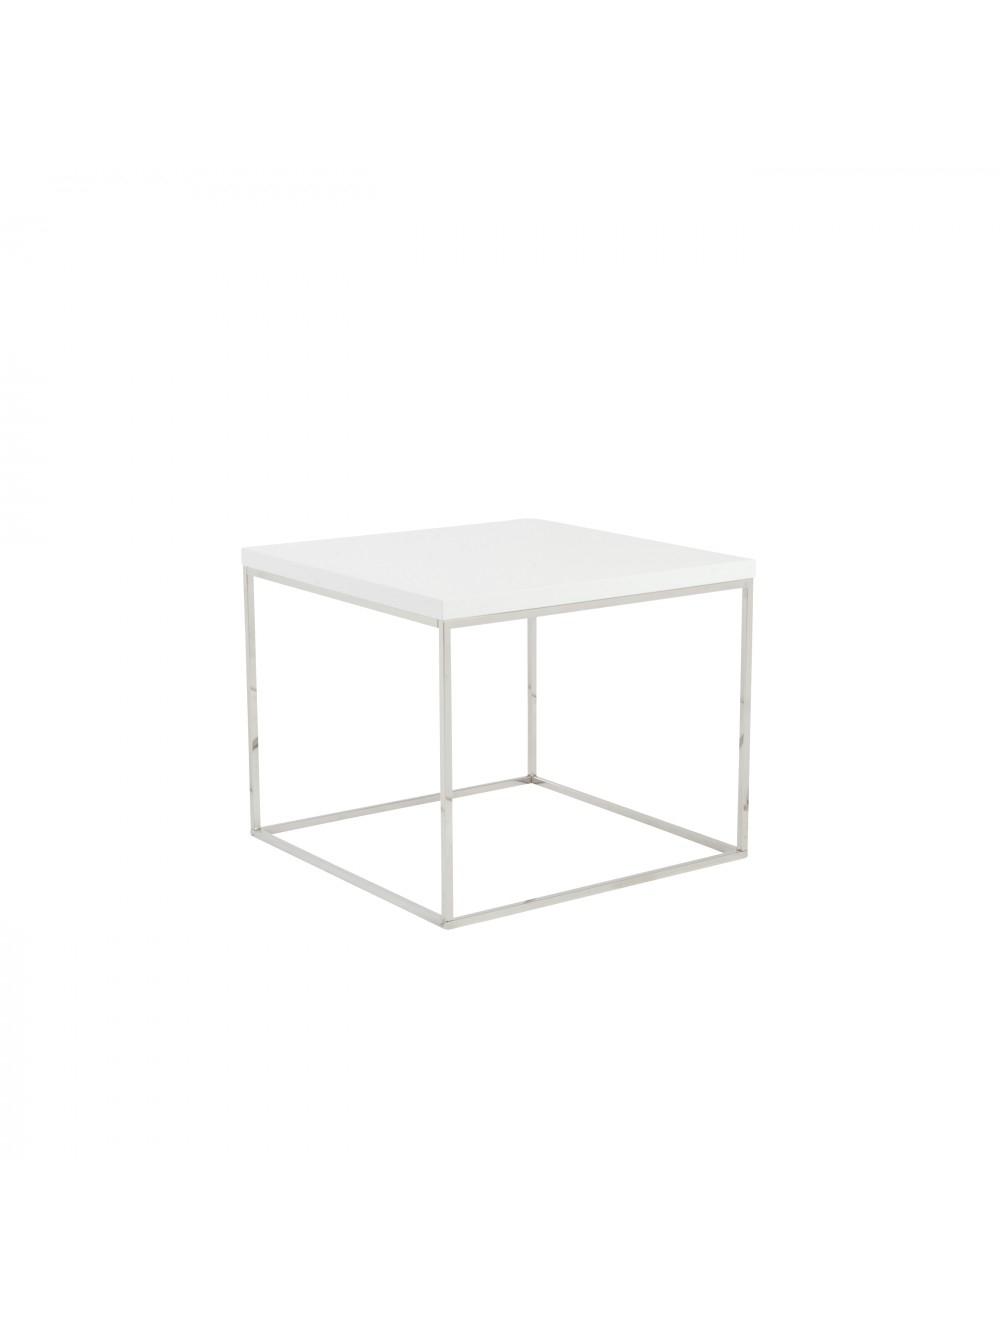 KAITLIN SIDE TABLE - Image 1